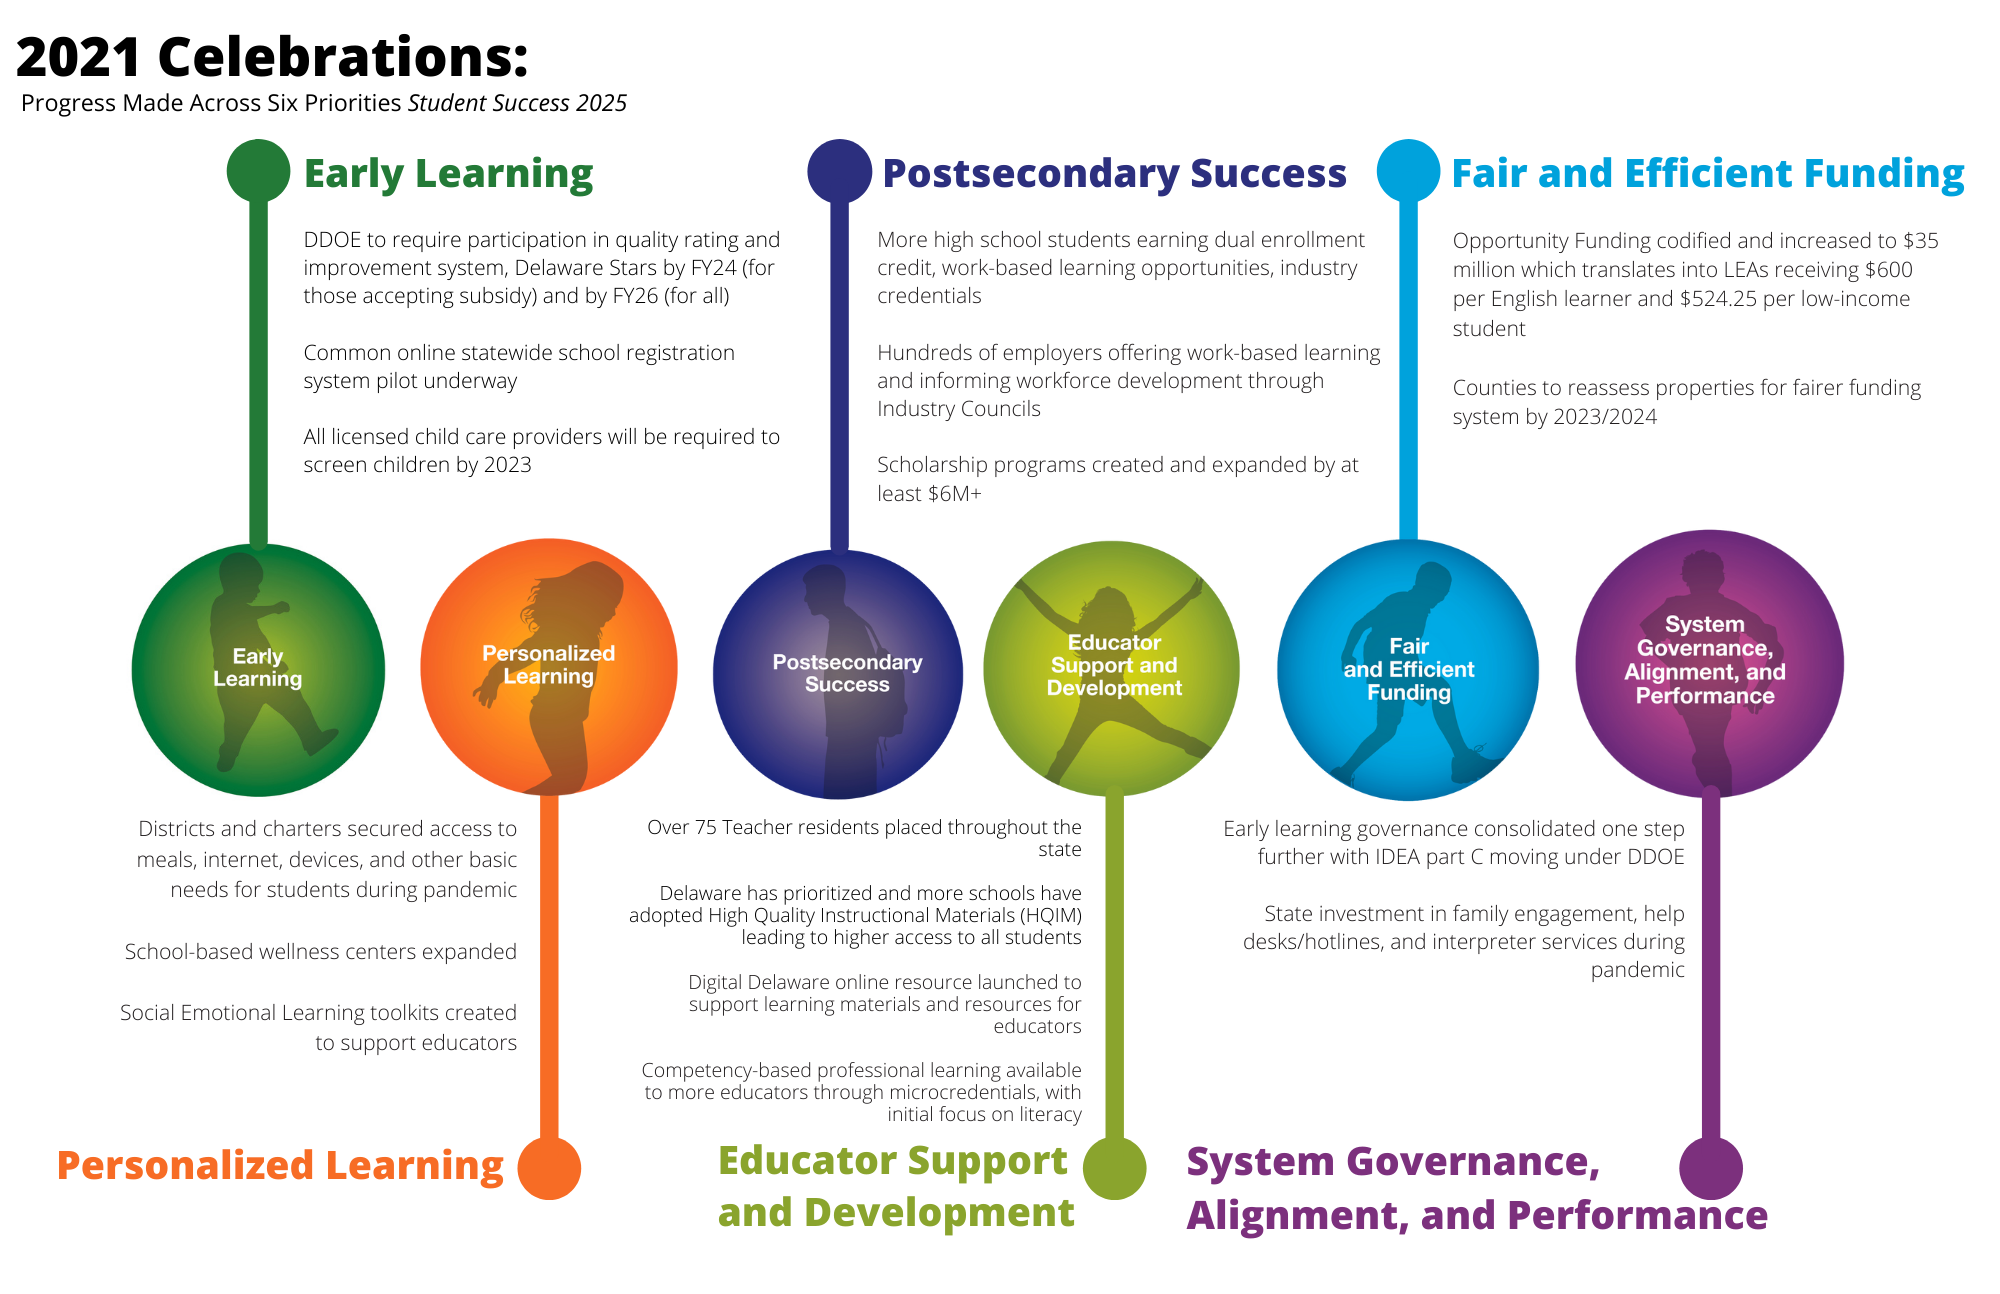 2021 CELEBRATIONS: PROGRESS MADE ACROSS SIX CORE AREAS IN STUDENT SUCCESS 2025